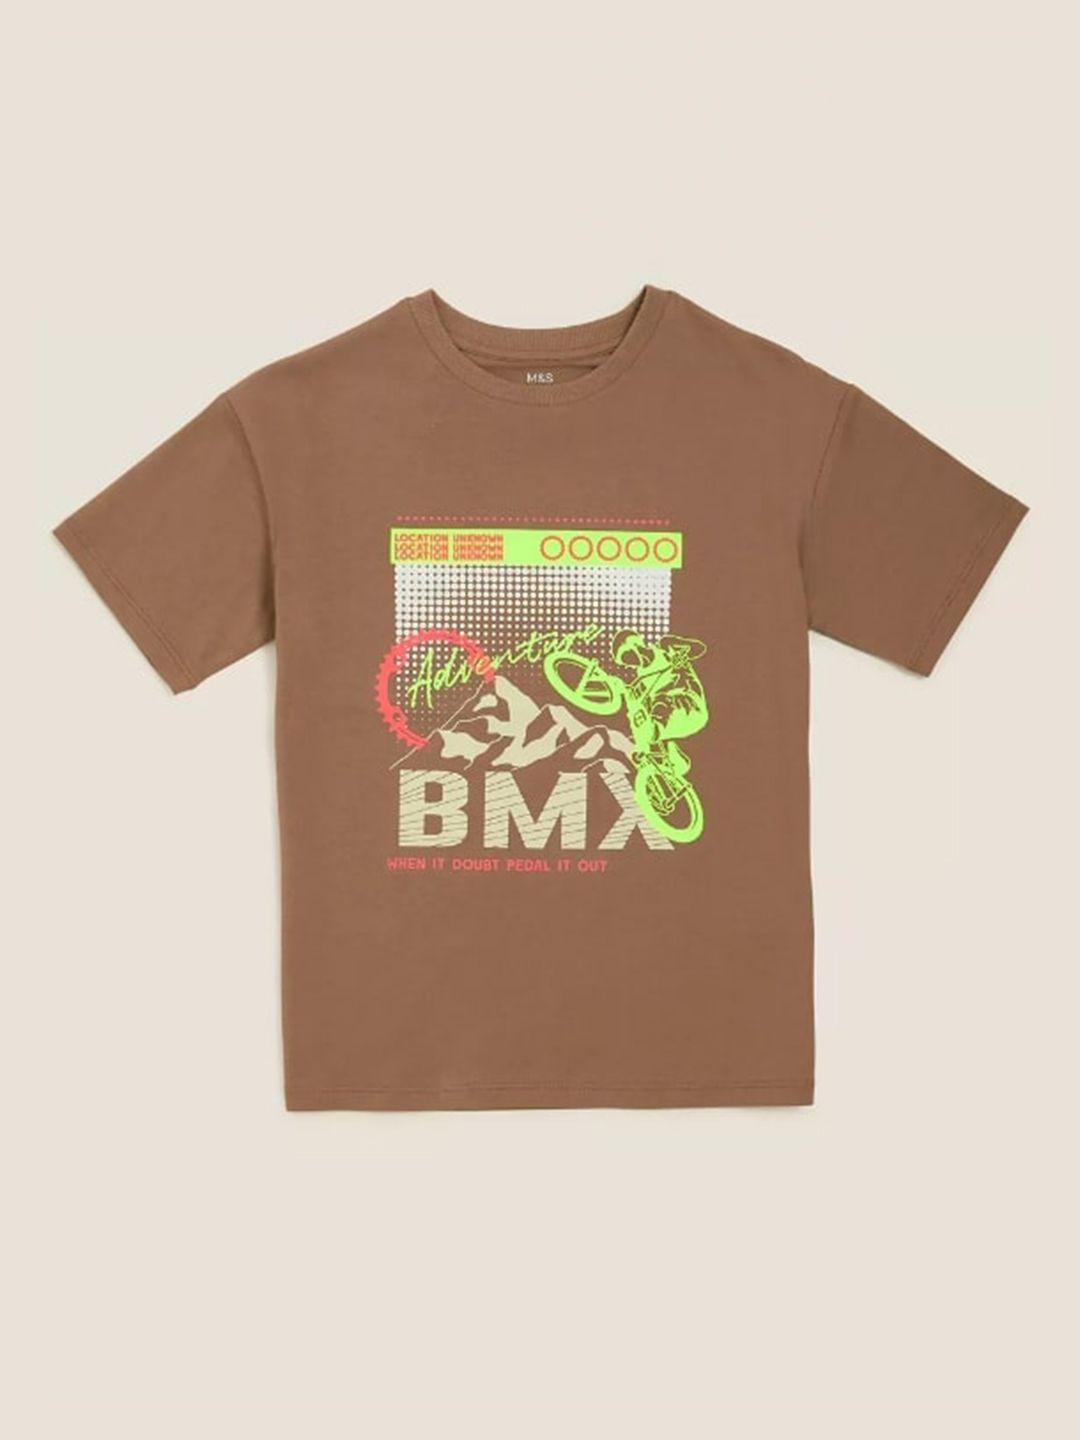 marks & spencer boys brown graphic printed t-shirt